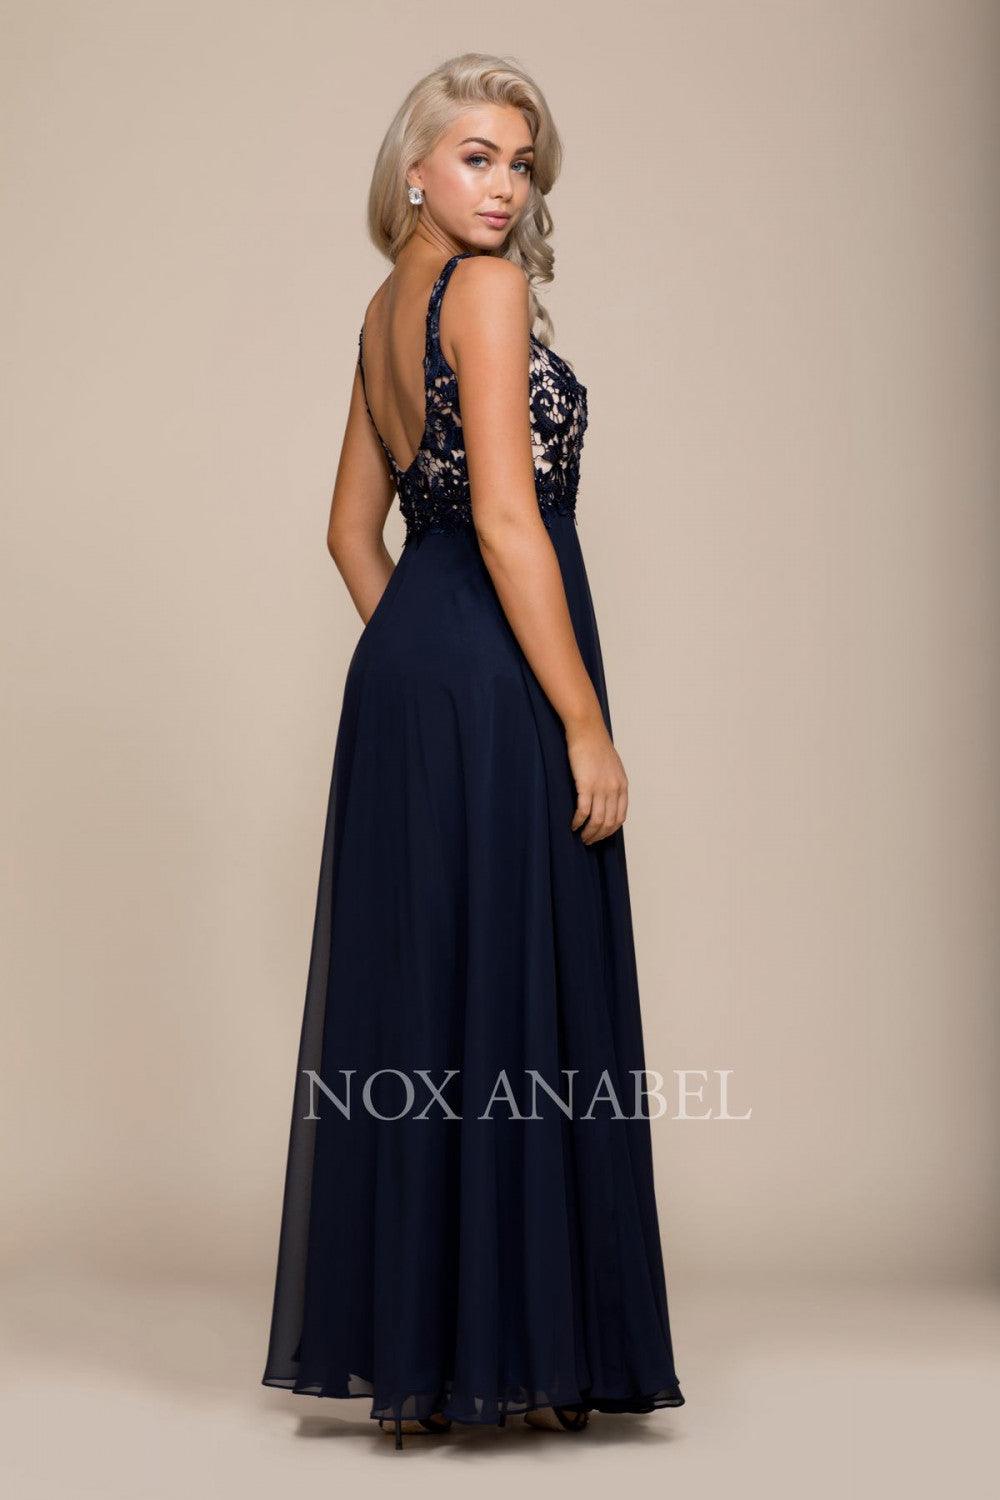 Long Sleeveless V Neck Prom Dress Evening Gown - The Dress Outlet Nox Anabel